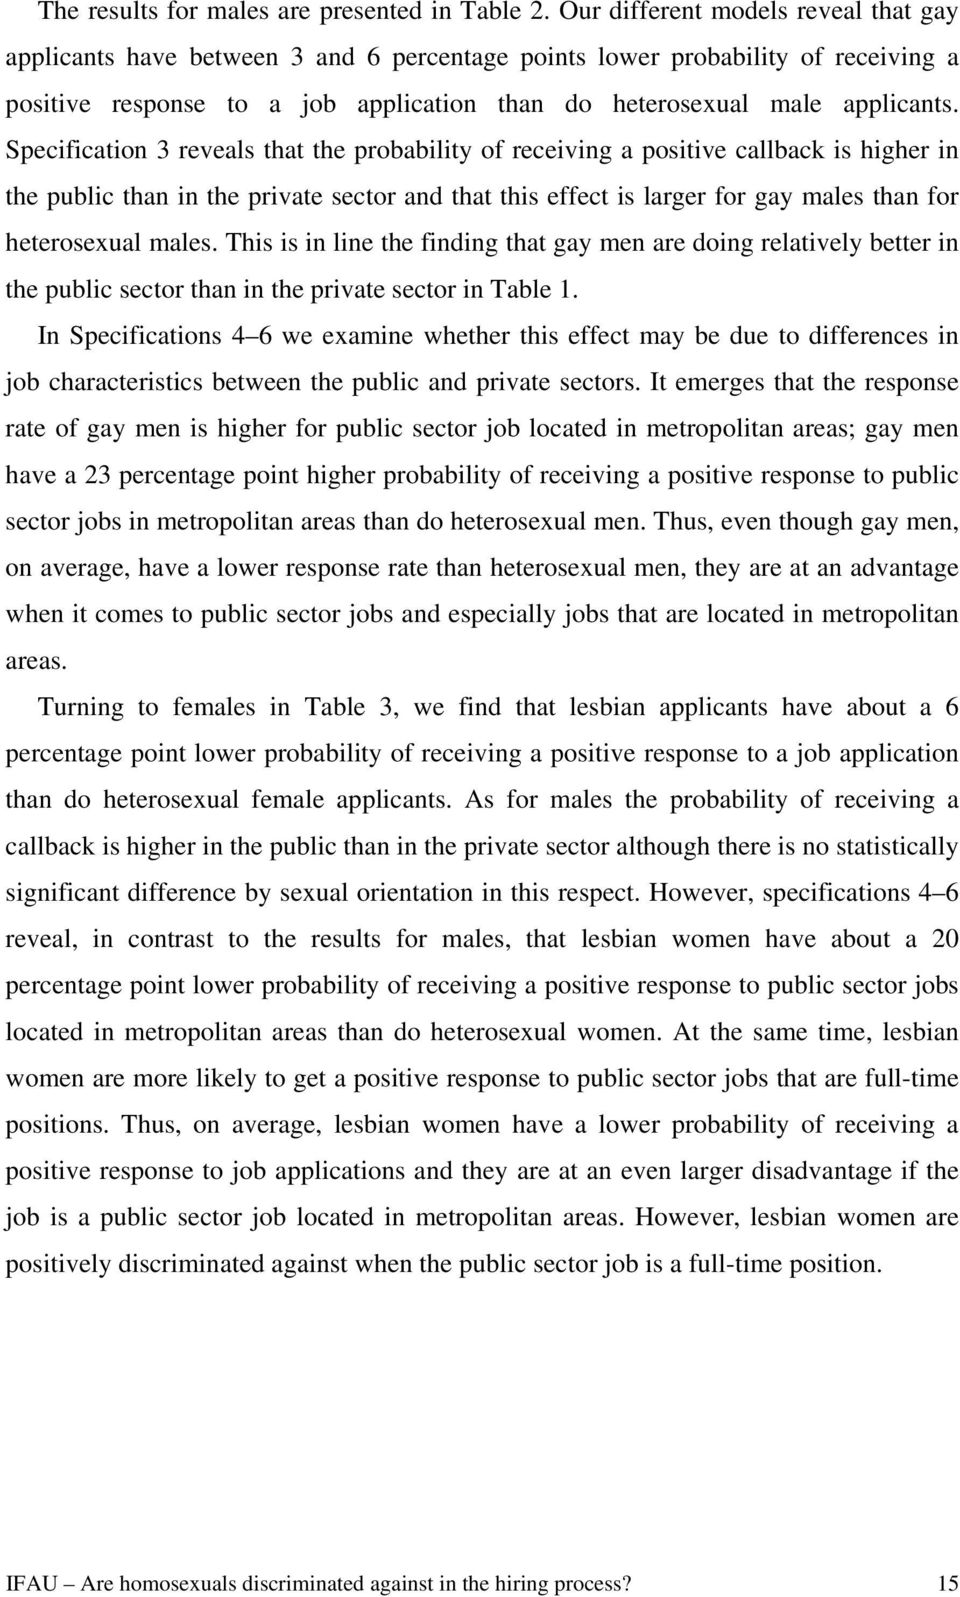 3 reveals that the probability of receiving a positive callback is higher in the public than in the private sector and that this effect is larger for gay males than for heterosexual males.